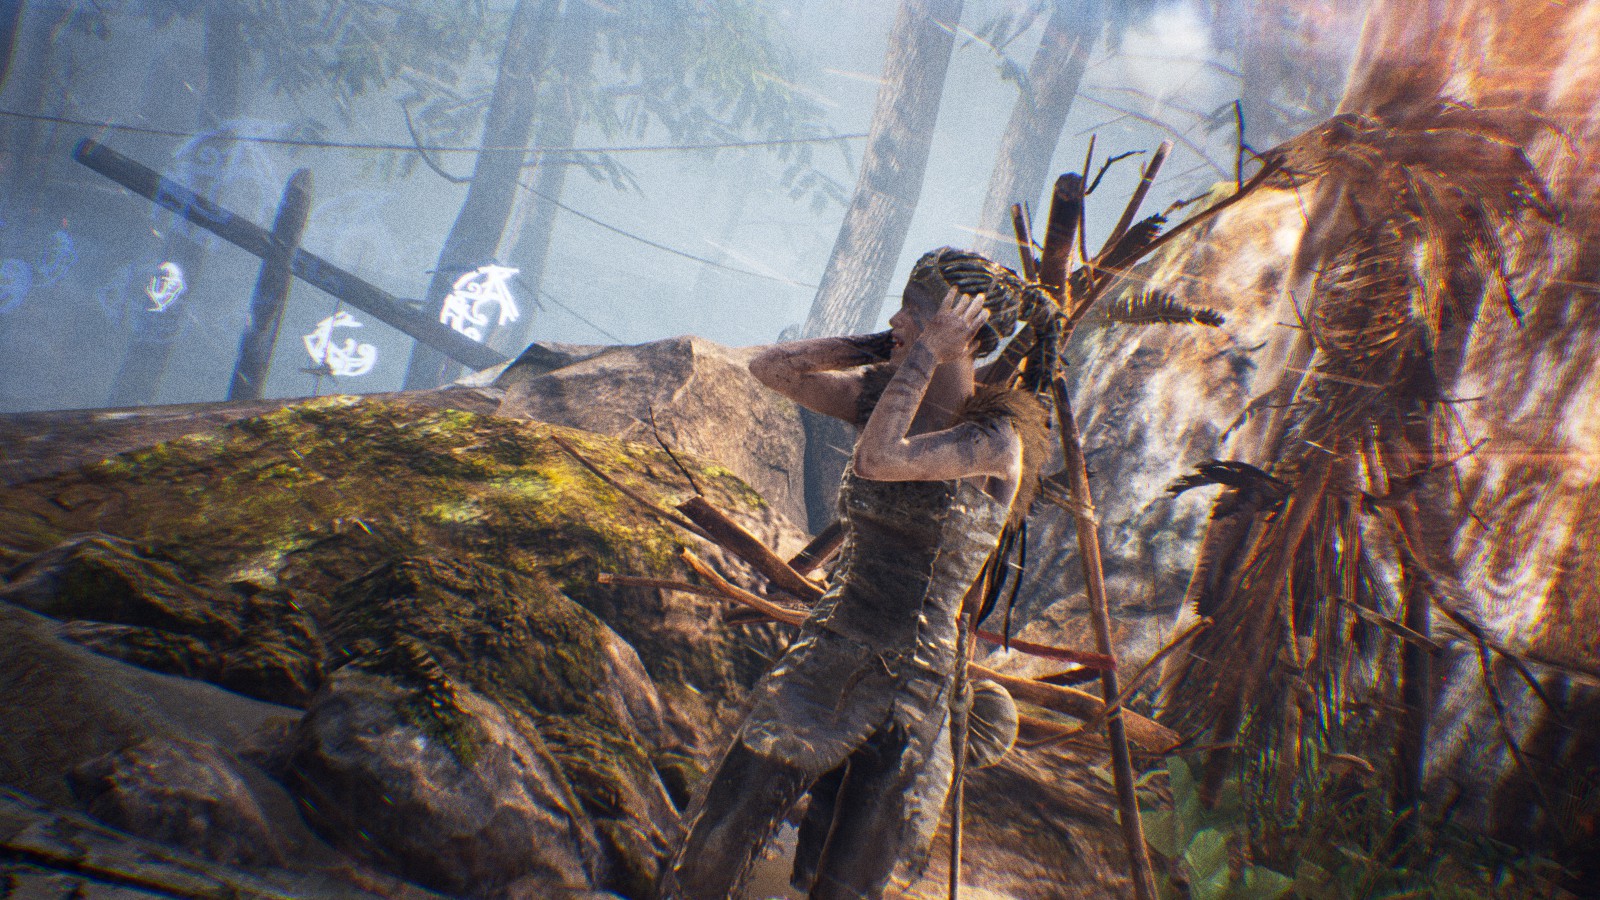 The Daily Crate | Gaming: The Intricate Beauty of Hellblade: Senua's Sacrifice